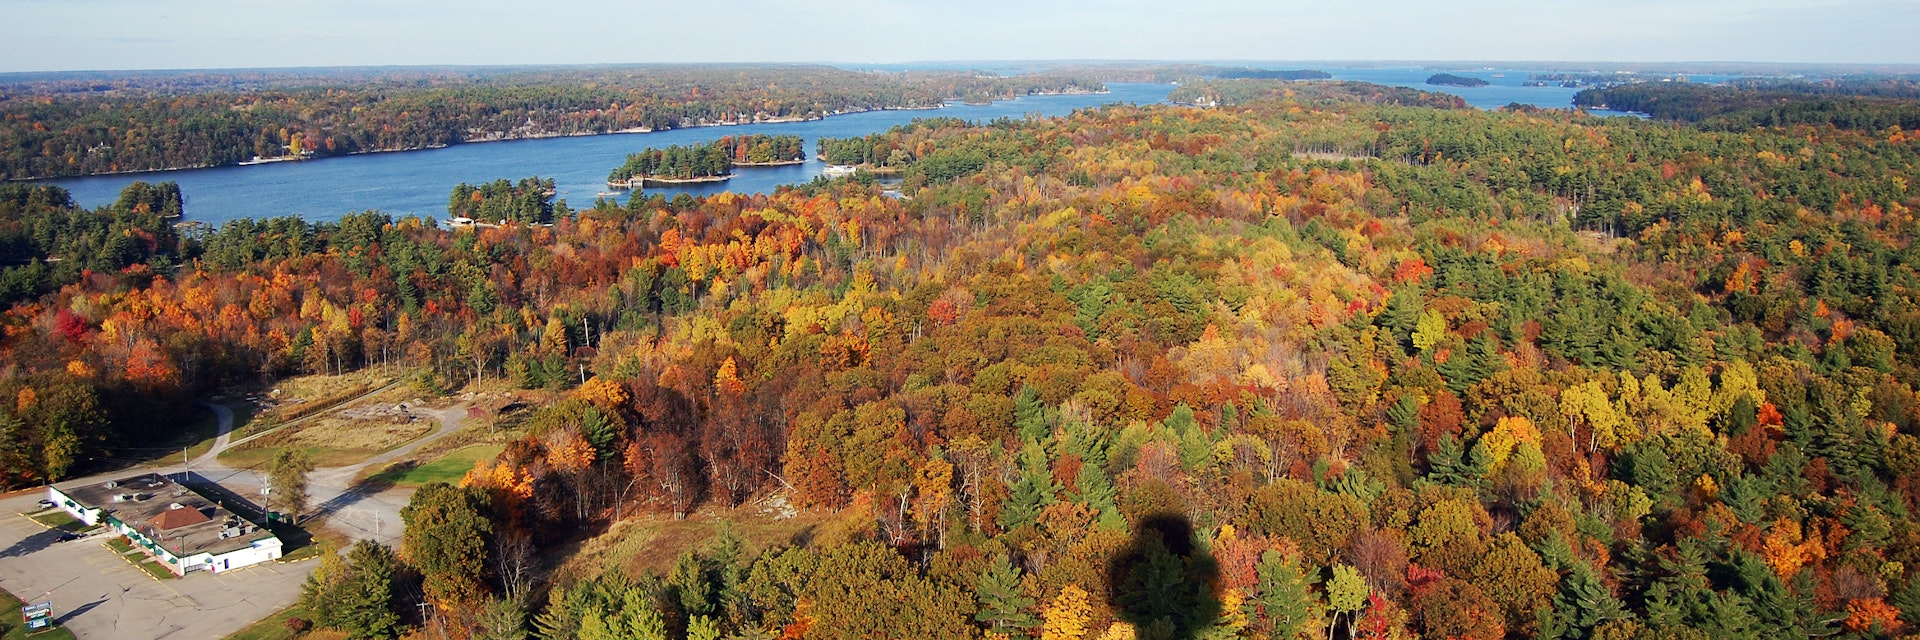 Thousand Islands National Park, as seen from the sky deck on Hill Island during fall.
94922413
aerial, alexandria, america, american, architecture, attraction, bay, beautiful, beauty, blue, border, canada, classical, colorful, deck, detail, fall, foliage, forest, gateway, great, island, lake, landmark, landscape, lawrence, magnificent, mansion, maple, national, new, old, park, region, river, romance, romantic, saint, sculpture, sky, state, thousand, tour, tourist, tower, travel, tree, usa, waterway, york